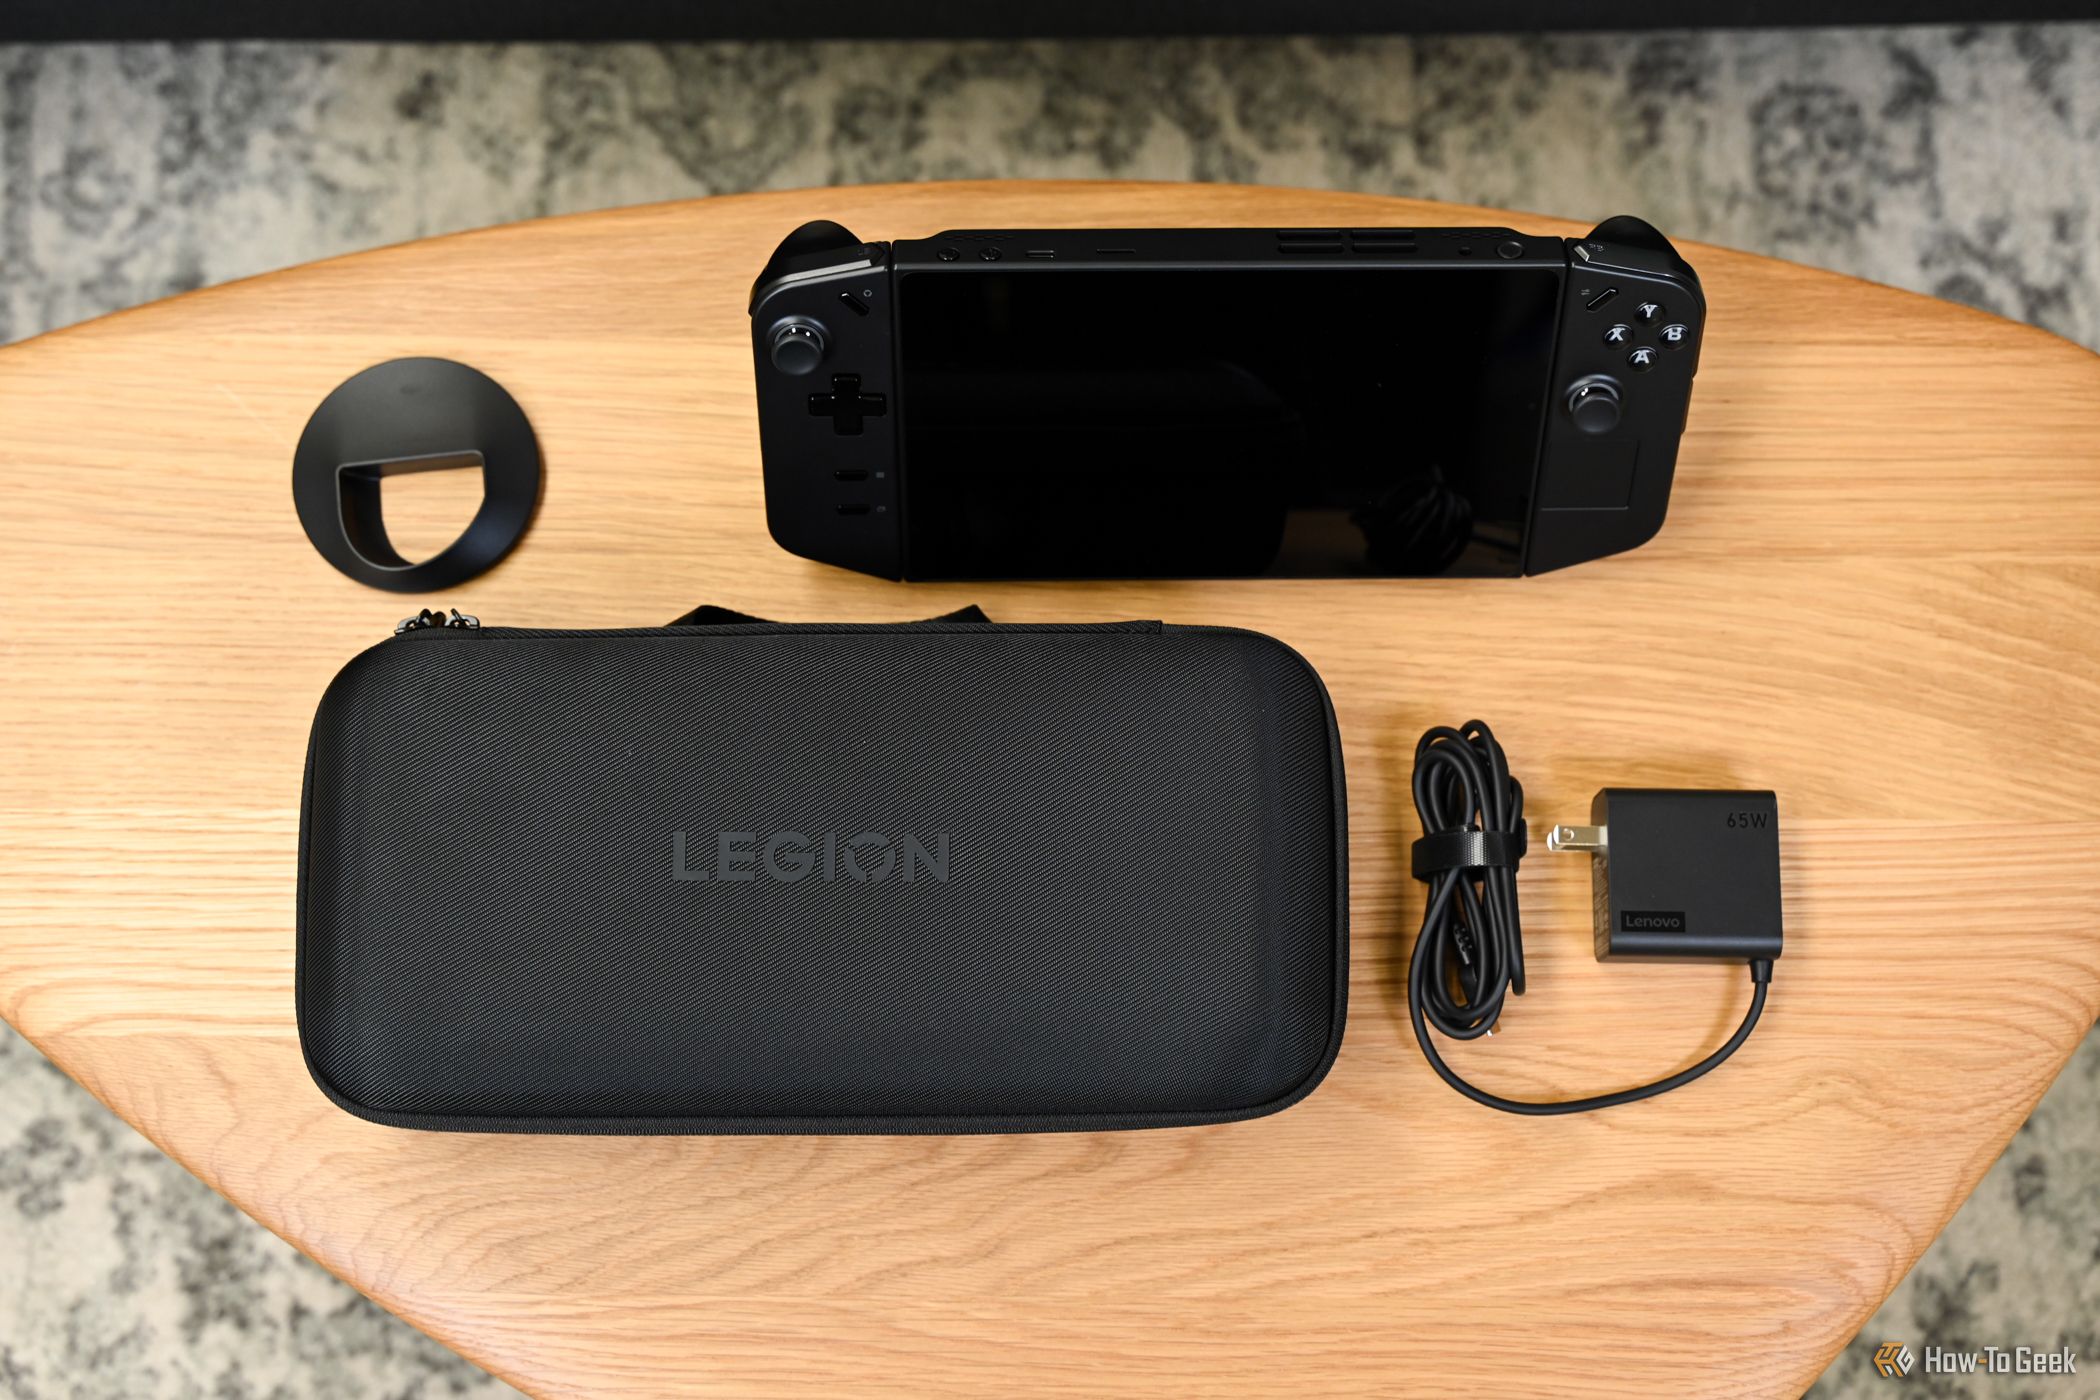 The Lenovo Legion Go with its accessories